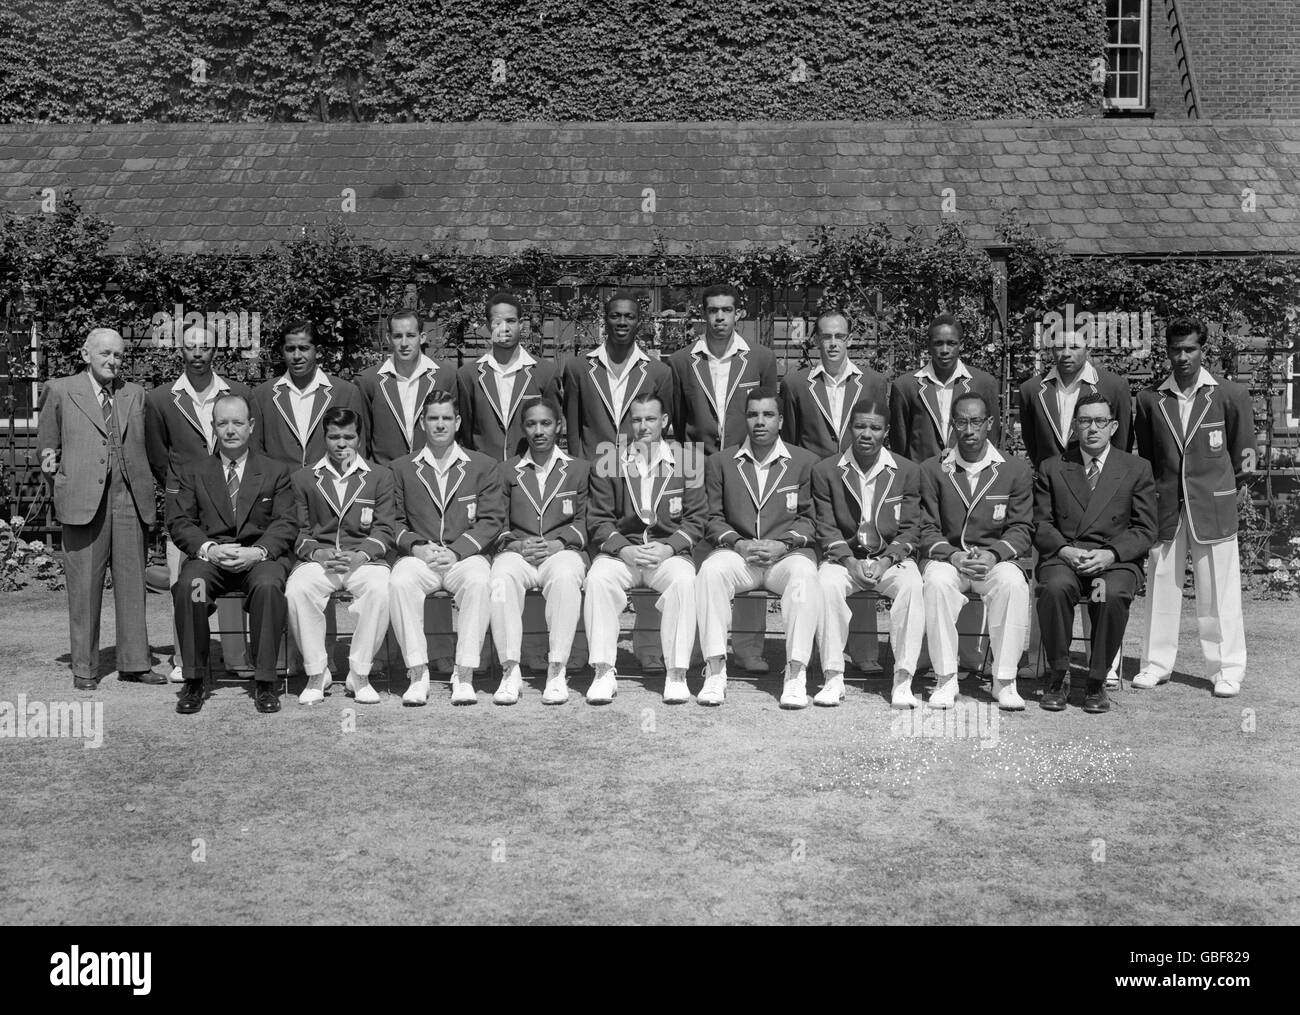 Cricket - England V West Indies - 2. Test - 1. Tag - Lord - London - 1957 Stockfoto